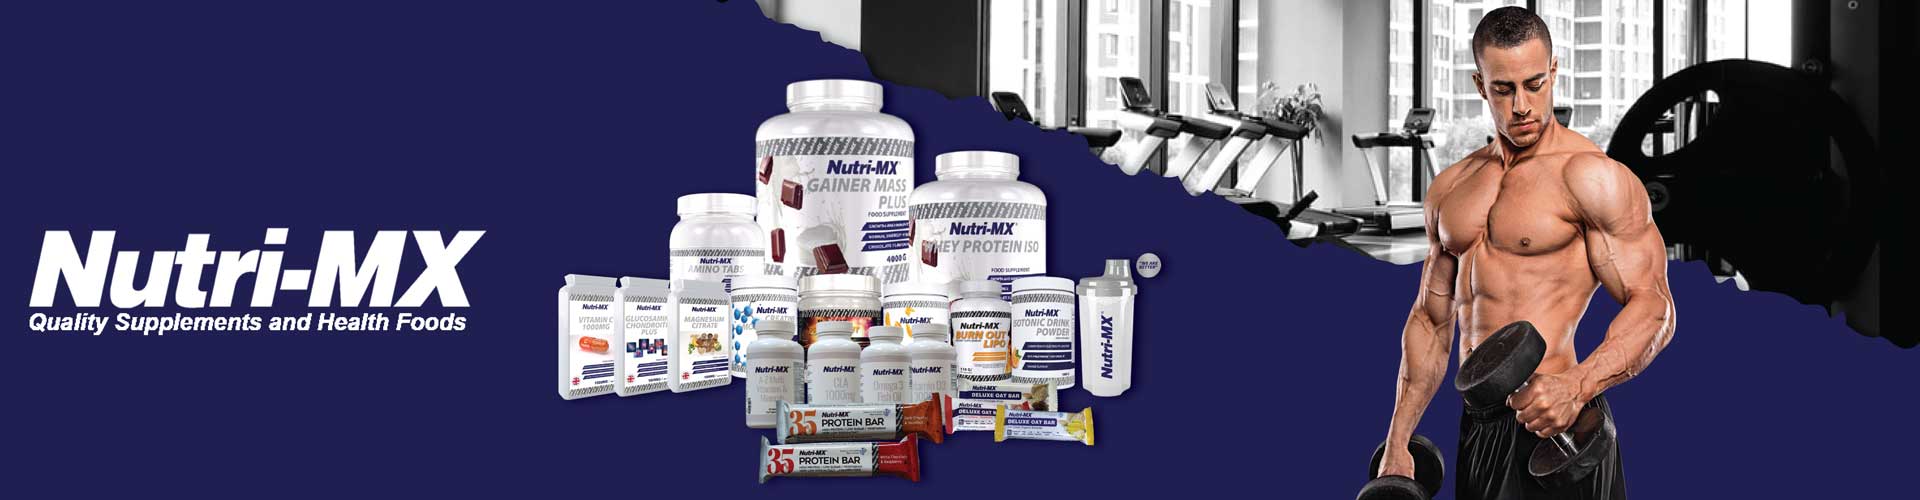 Nutri-MX all Poducts